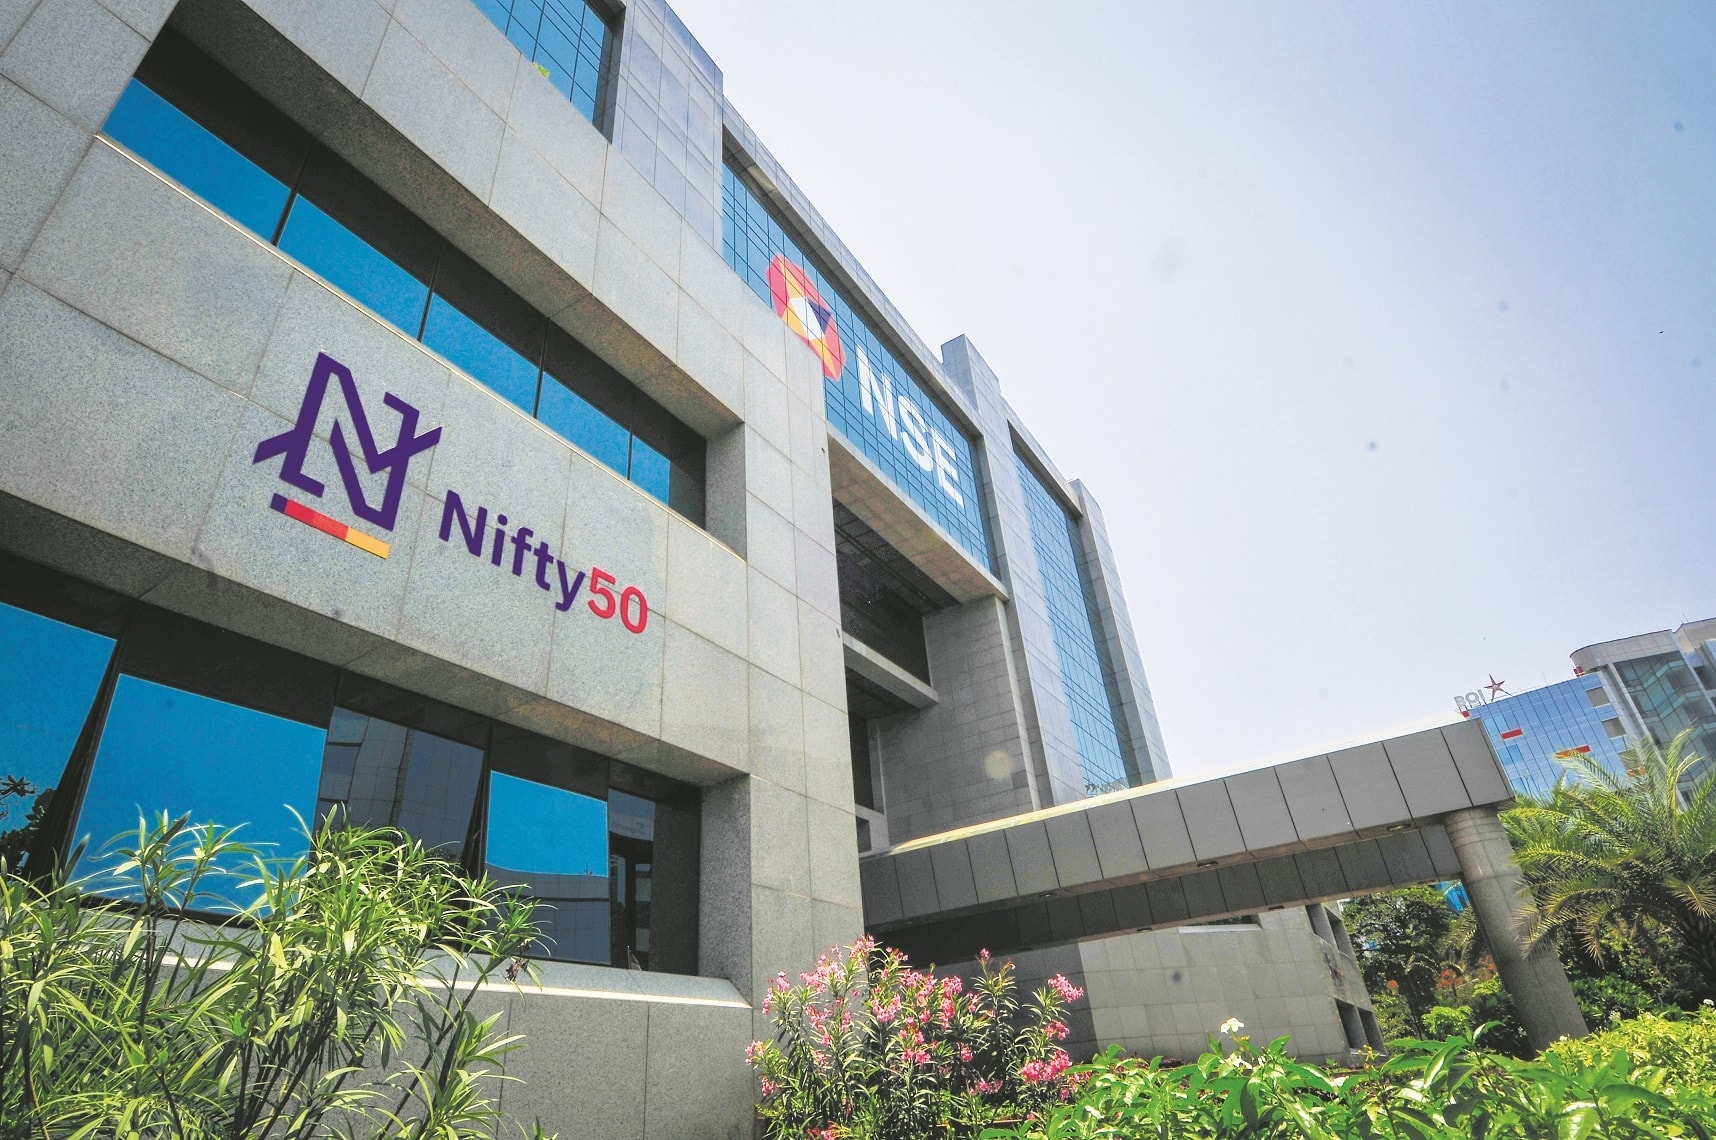 Nifty 50 index delivered positive returns in 18 out of 23 calendar years, with 7 years over 30% and 3 over 50%. Annualized returns since 1999 stood at 13.9% with volatility at 22.4%. Nifty 50 reached the historic milestone of 20,000 points after a 27-year journey.